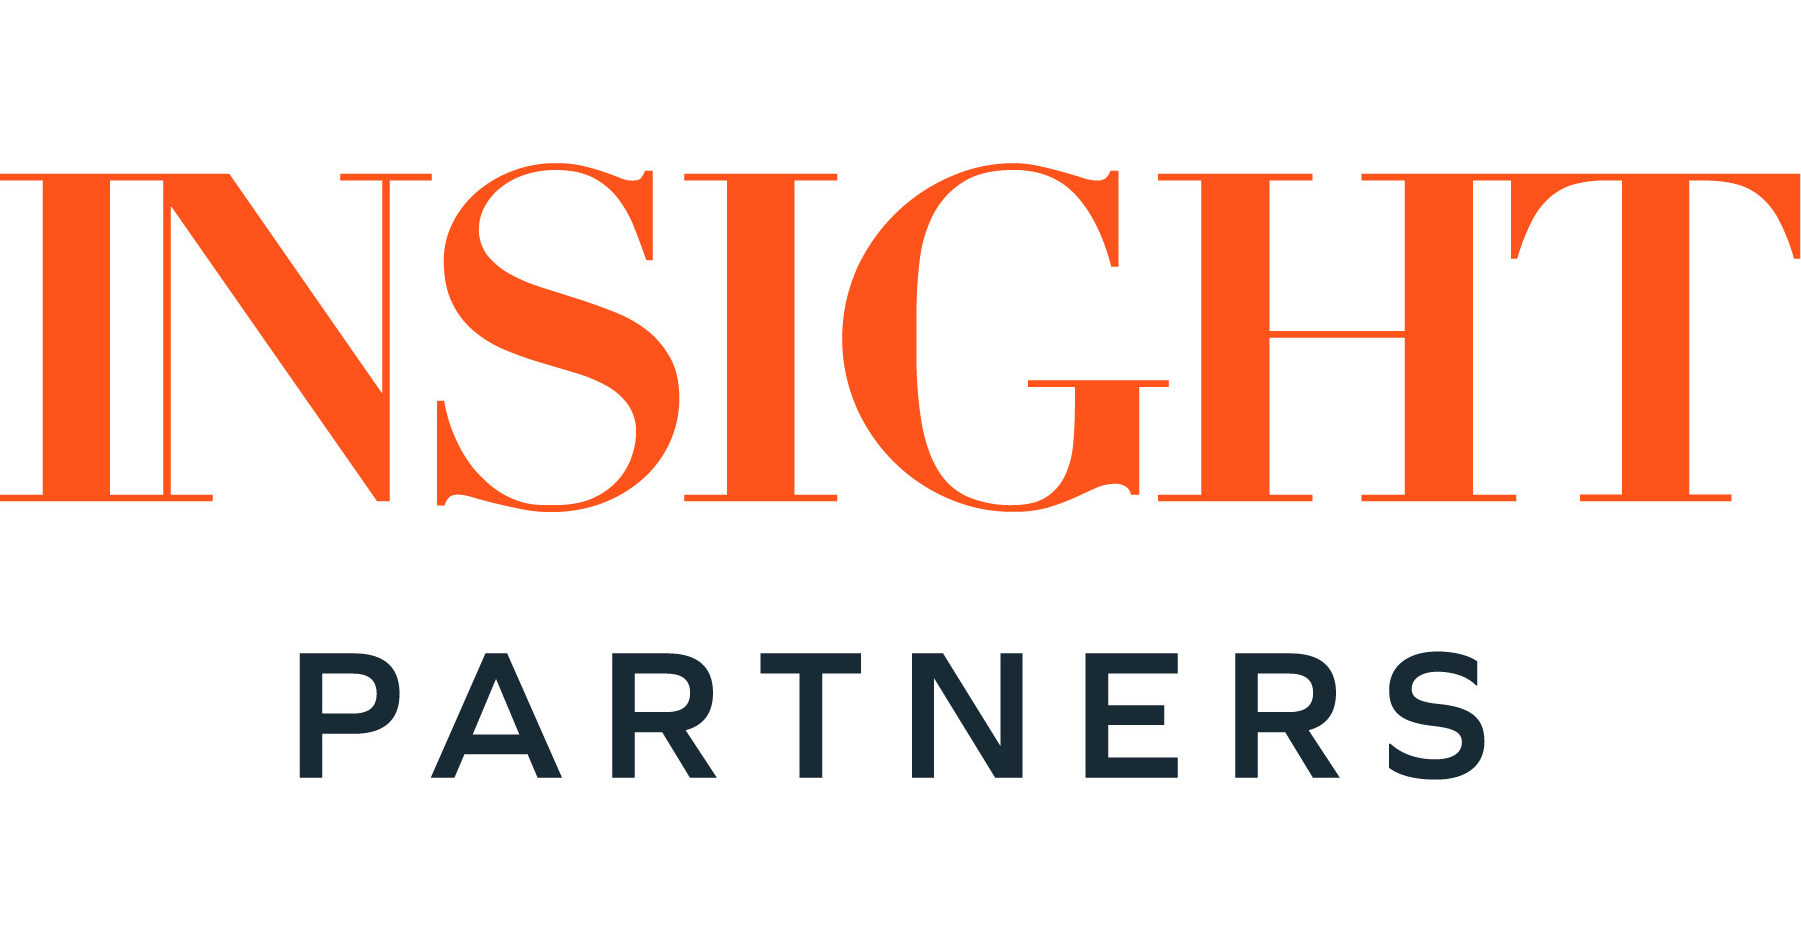 global software investor insight partners announces completion of $20 billion+ fundraise